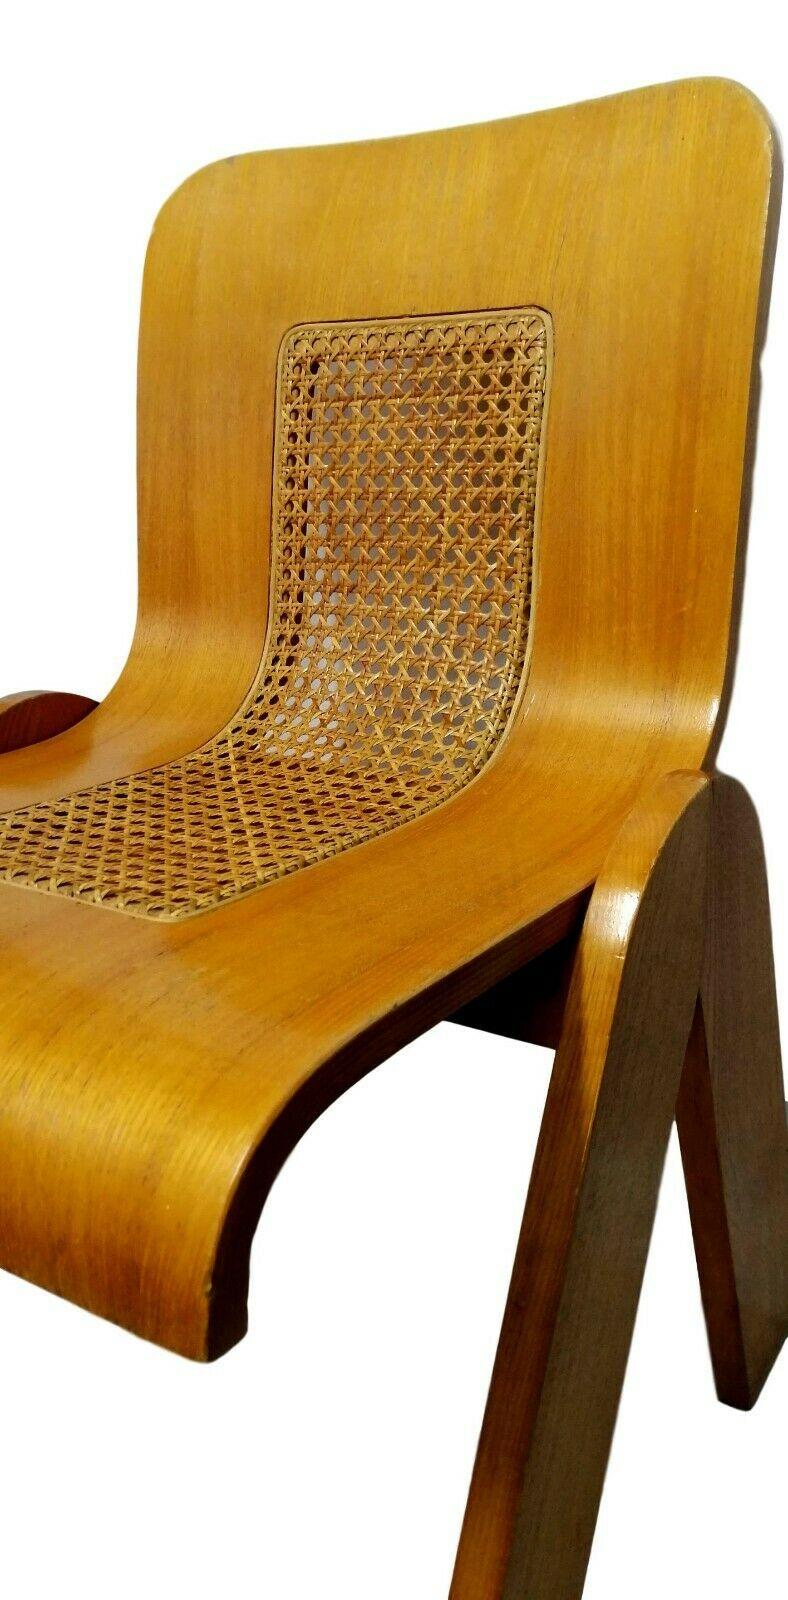 Splendid stilwood chair from the 1970s designed by Gigi Sabadin

Made of curved plywood, with seat partially covered with Viennese straw, measuring 73 cm in height, 44 cm in width, 50 cm in depth and 44 cm in height of the seat from the